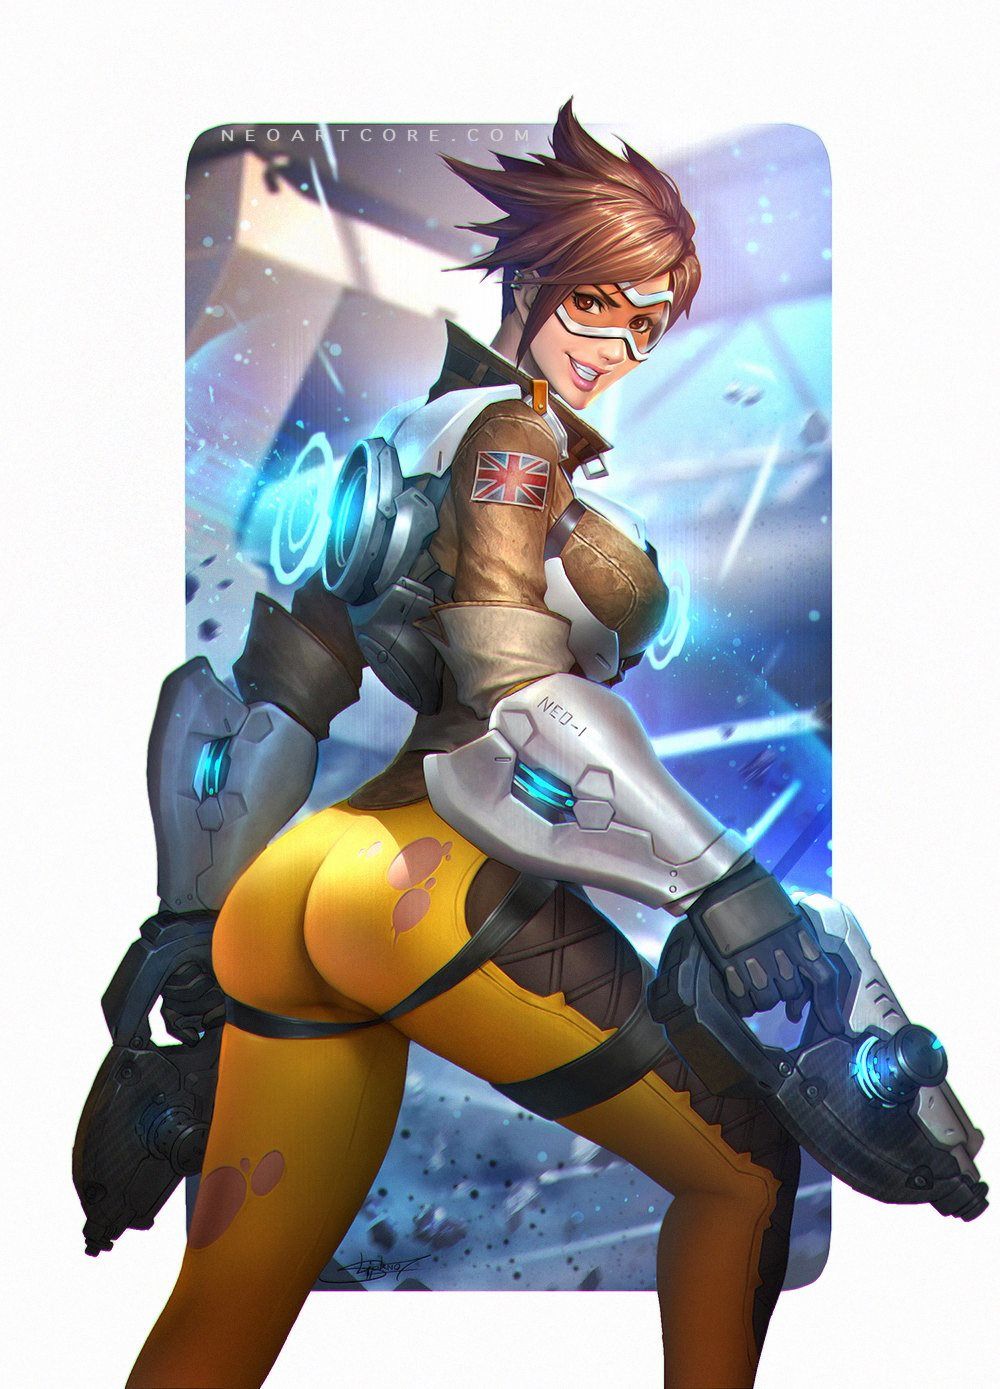 Thick Girls in Skin-tight Clothes - Overwatch Inspired